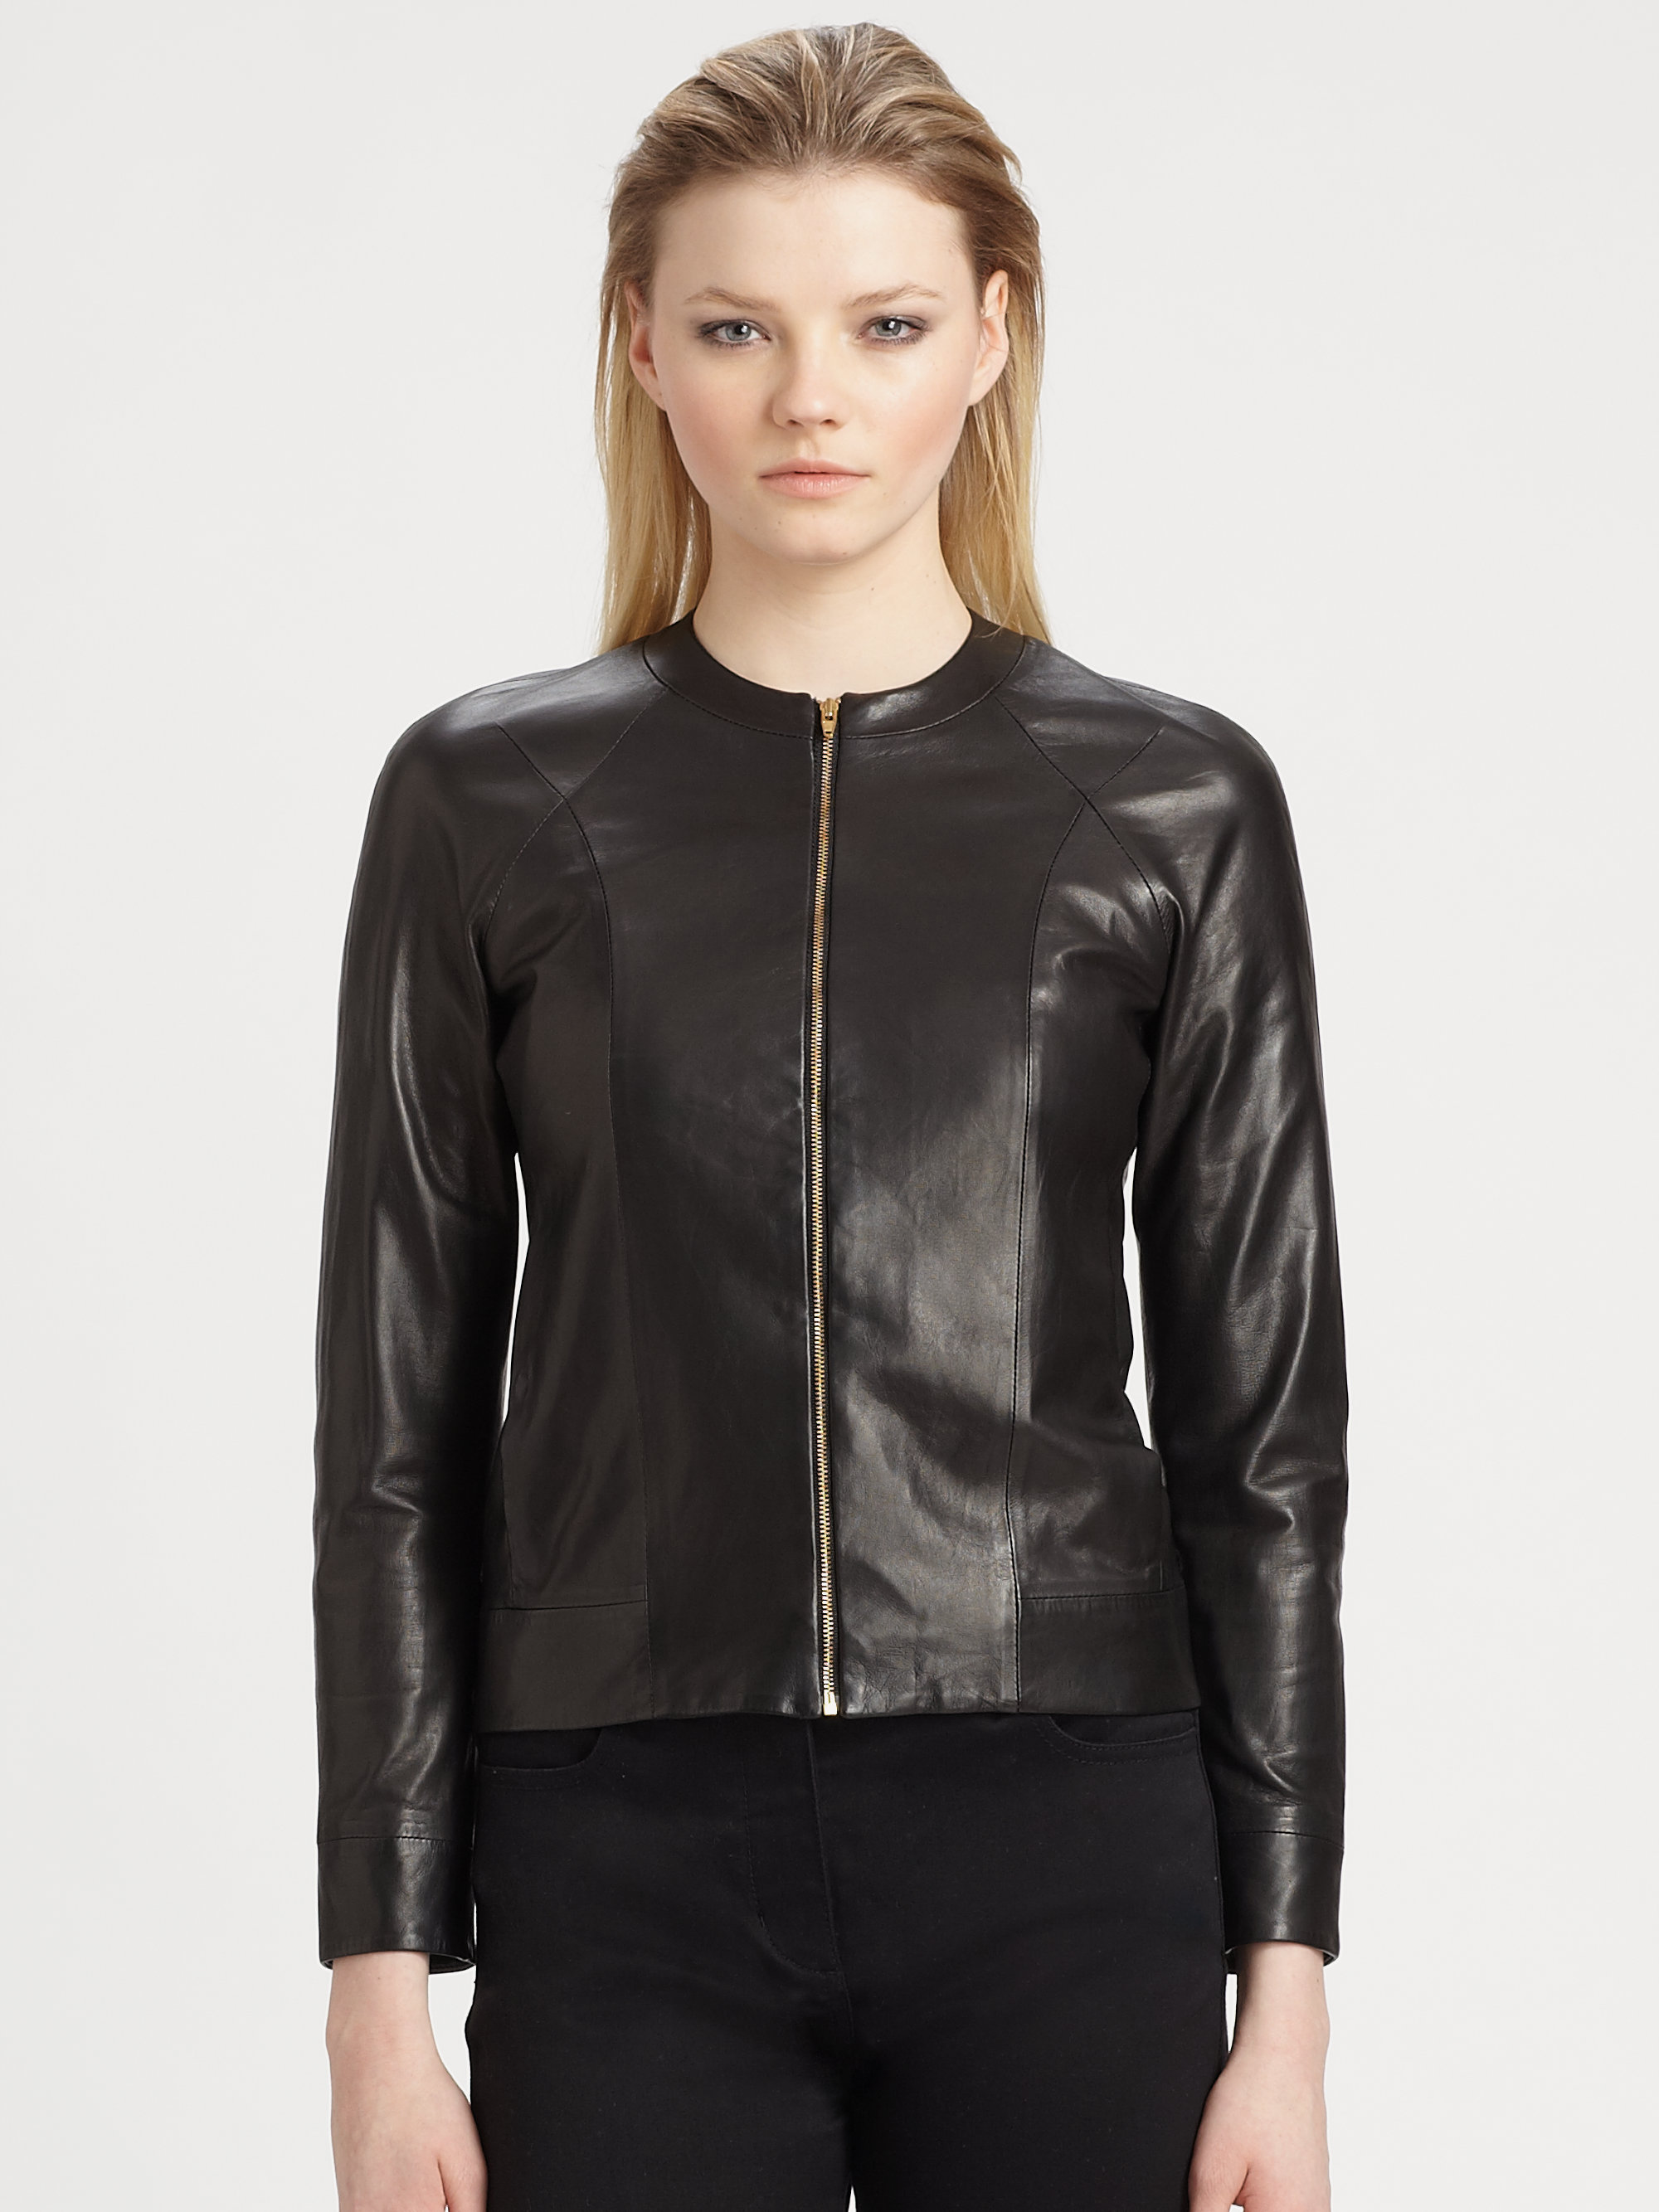 T By Alexander Wang Lightweight Leather Jacket in Black | Lyst